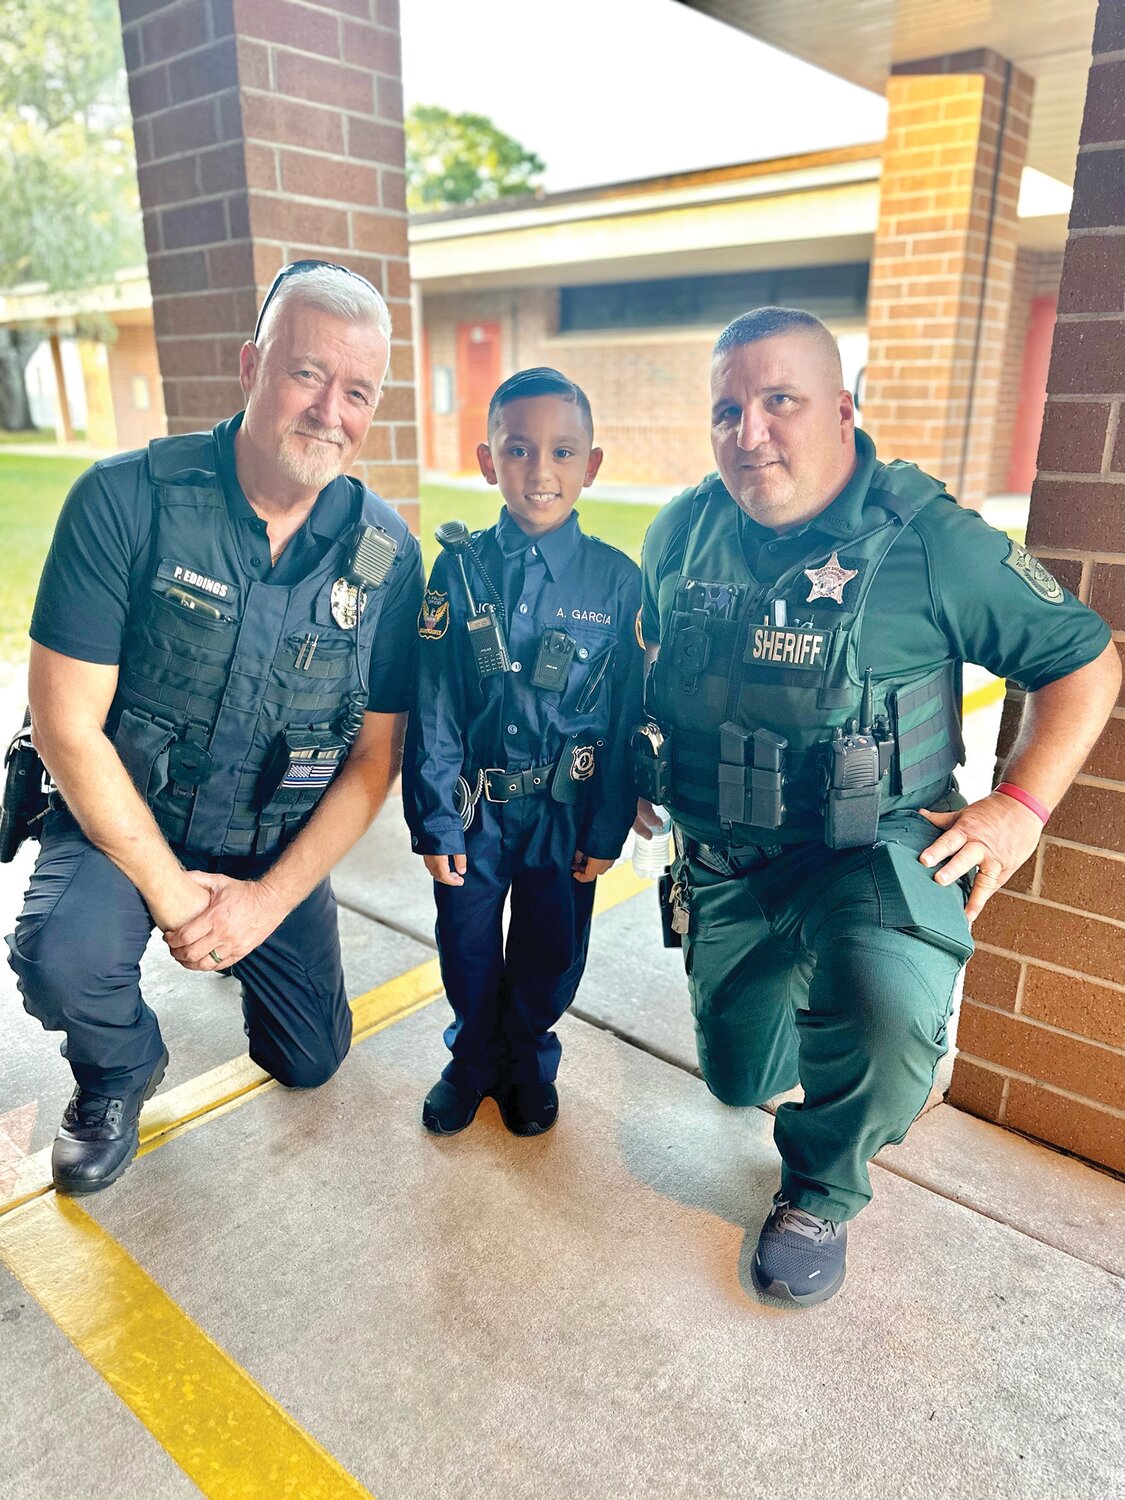 Amarhi is pictured with Officer Eddings (left) and Deputy Higgins (right).